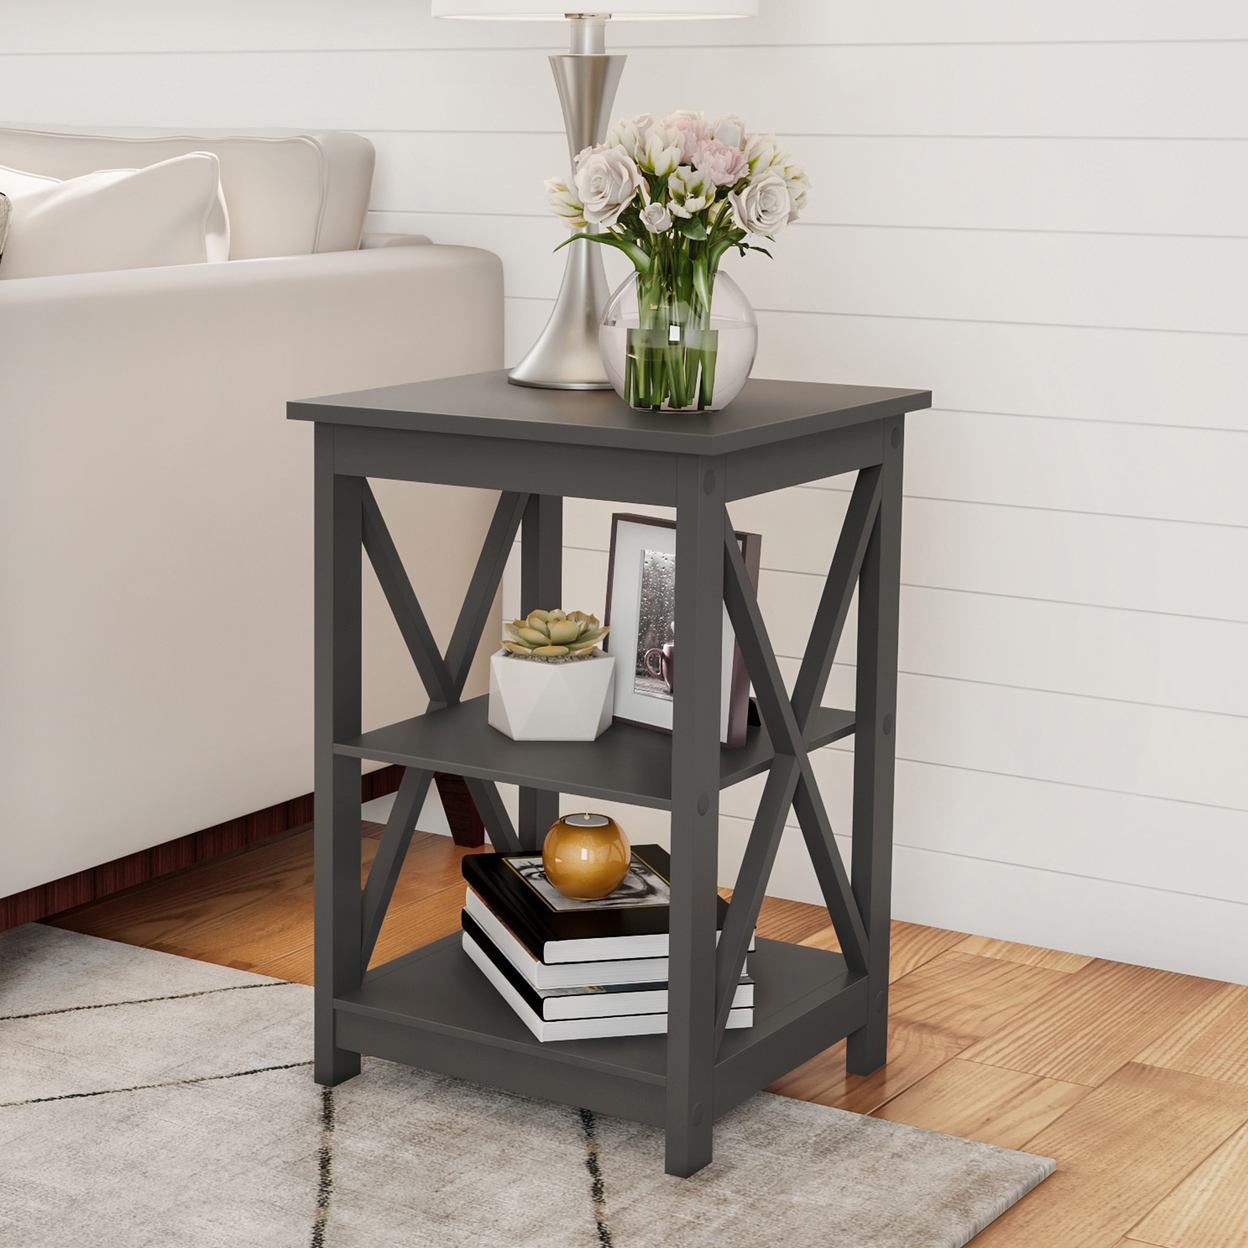 3 Shelf End Table Gray Accent Home Decor Livingroom Bedroom Stand